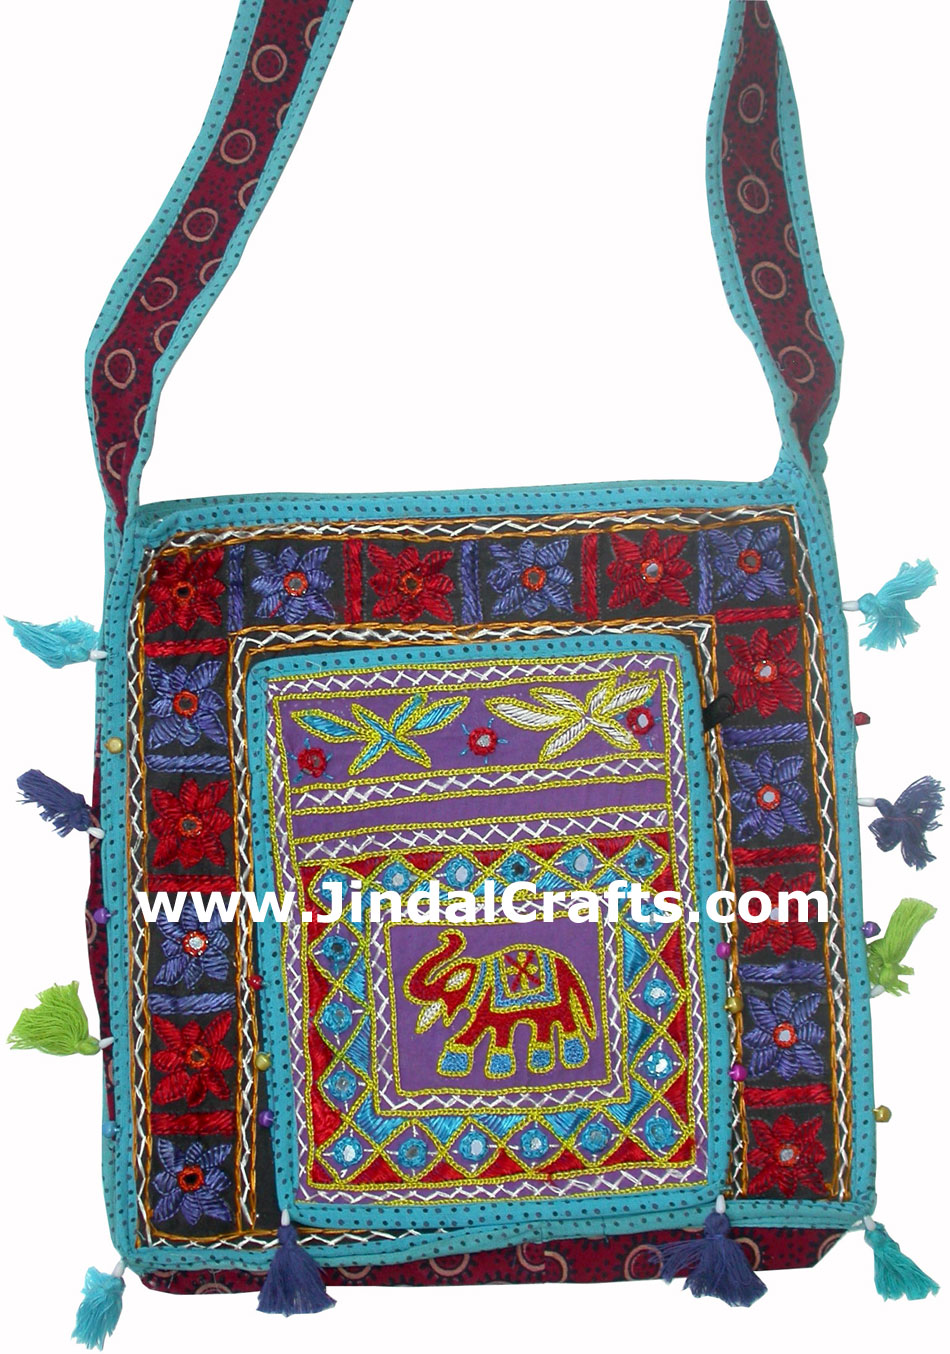 Handmade Colourful Traditional Shoulder Cotton Fabric Handbag from India